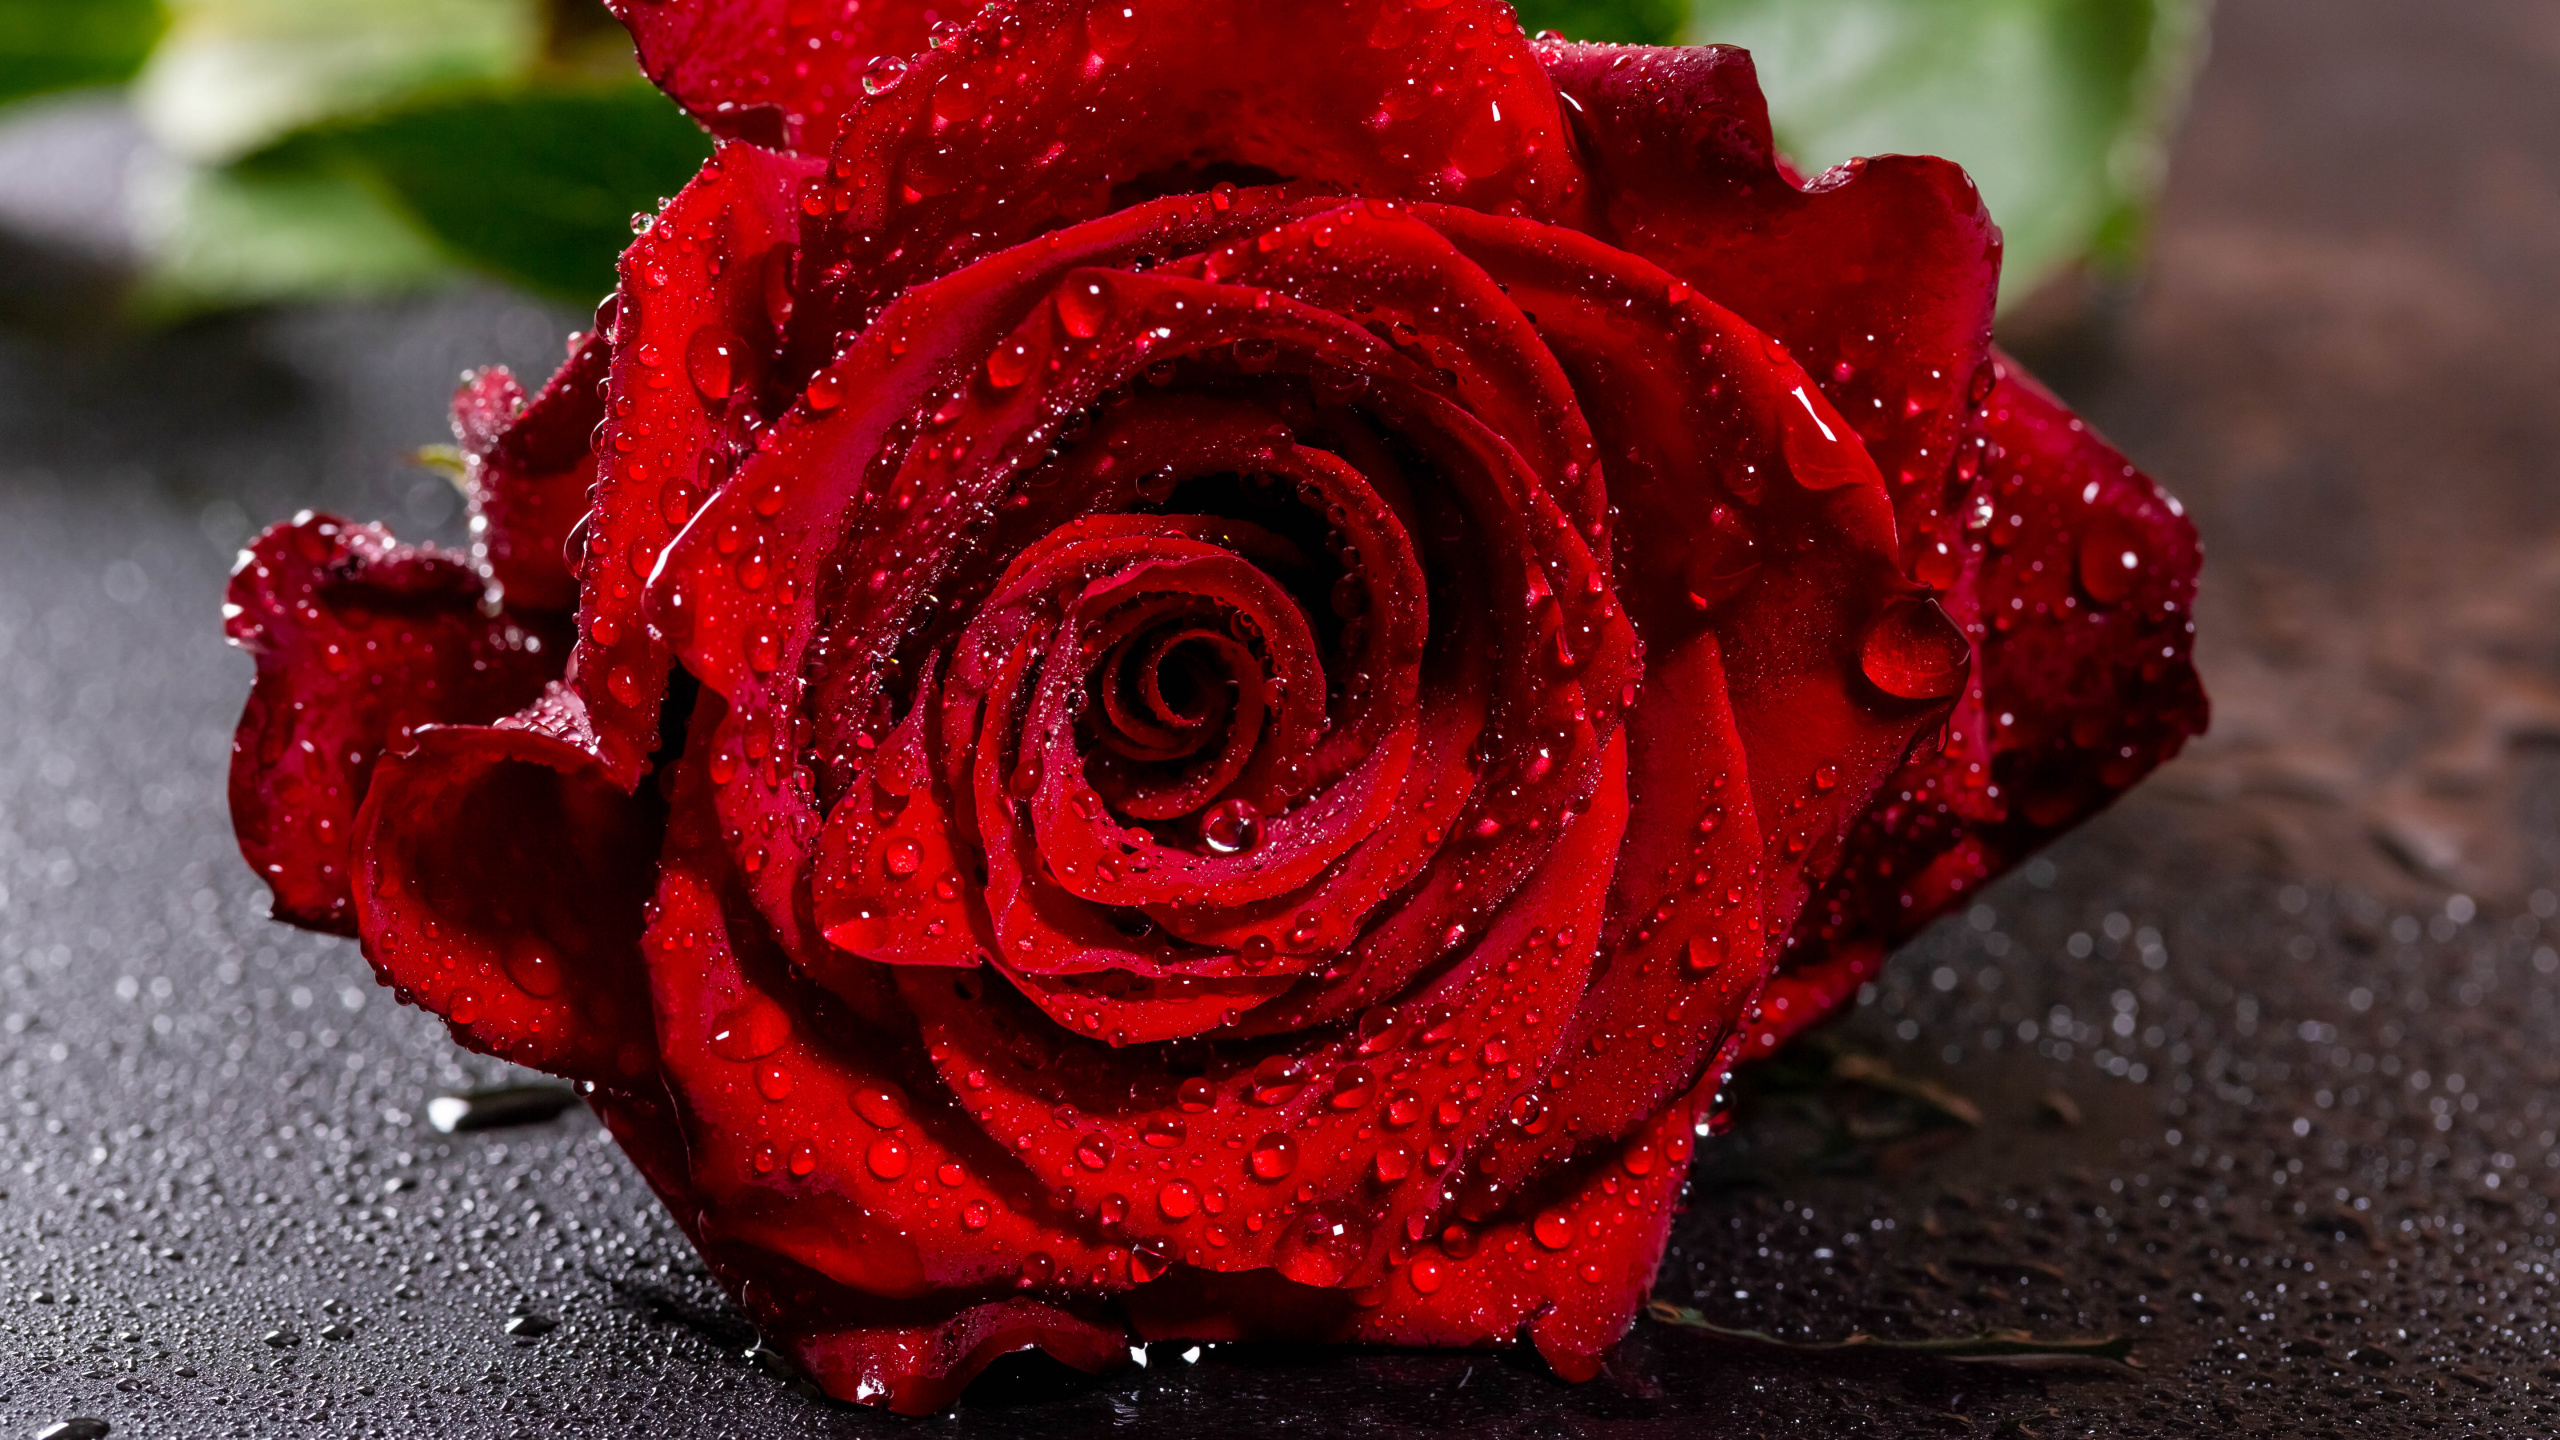 Red Rose on Black Surface. Wallpaper in 2560x1440 Resolution